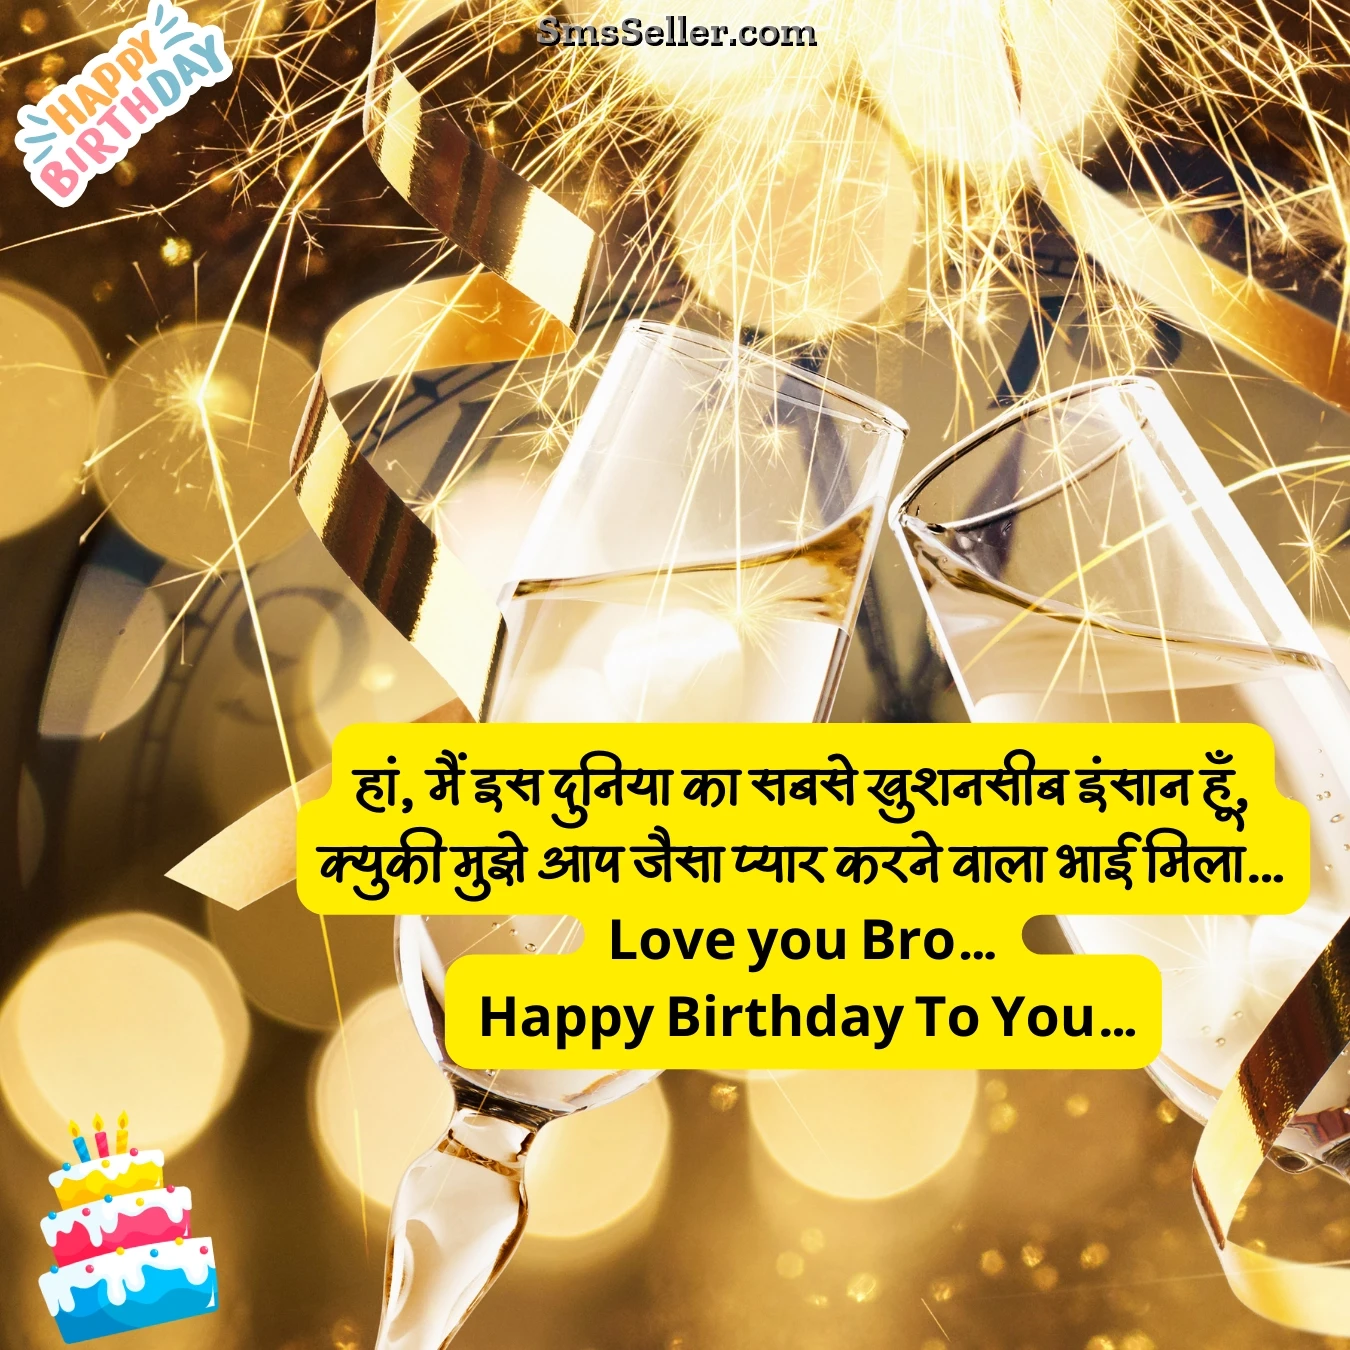 birthday wishes messages brother duniya haan